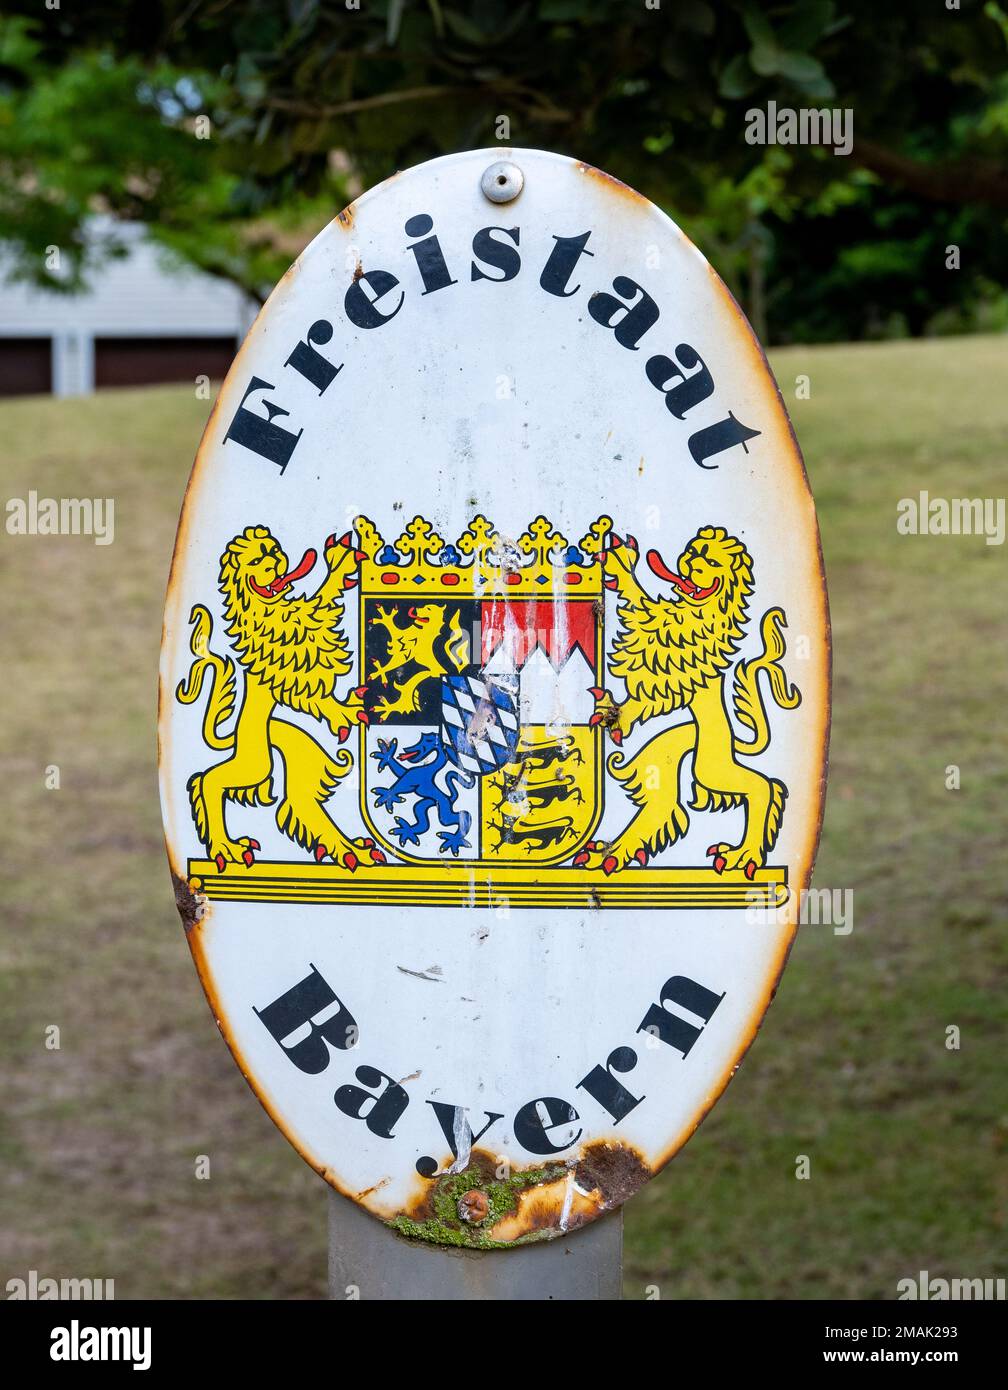 Emblem of the Free State of Bavaria, or Freistaat Bayern in German, with its Coat of Arms. Western Cape, South Africa. Stock Photo